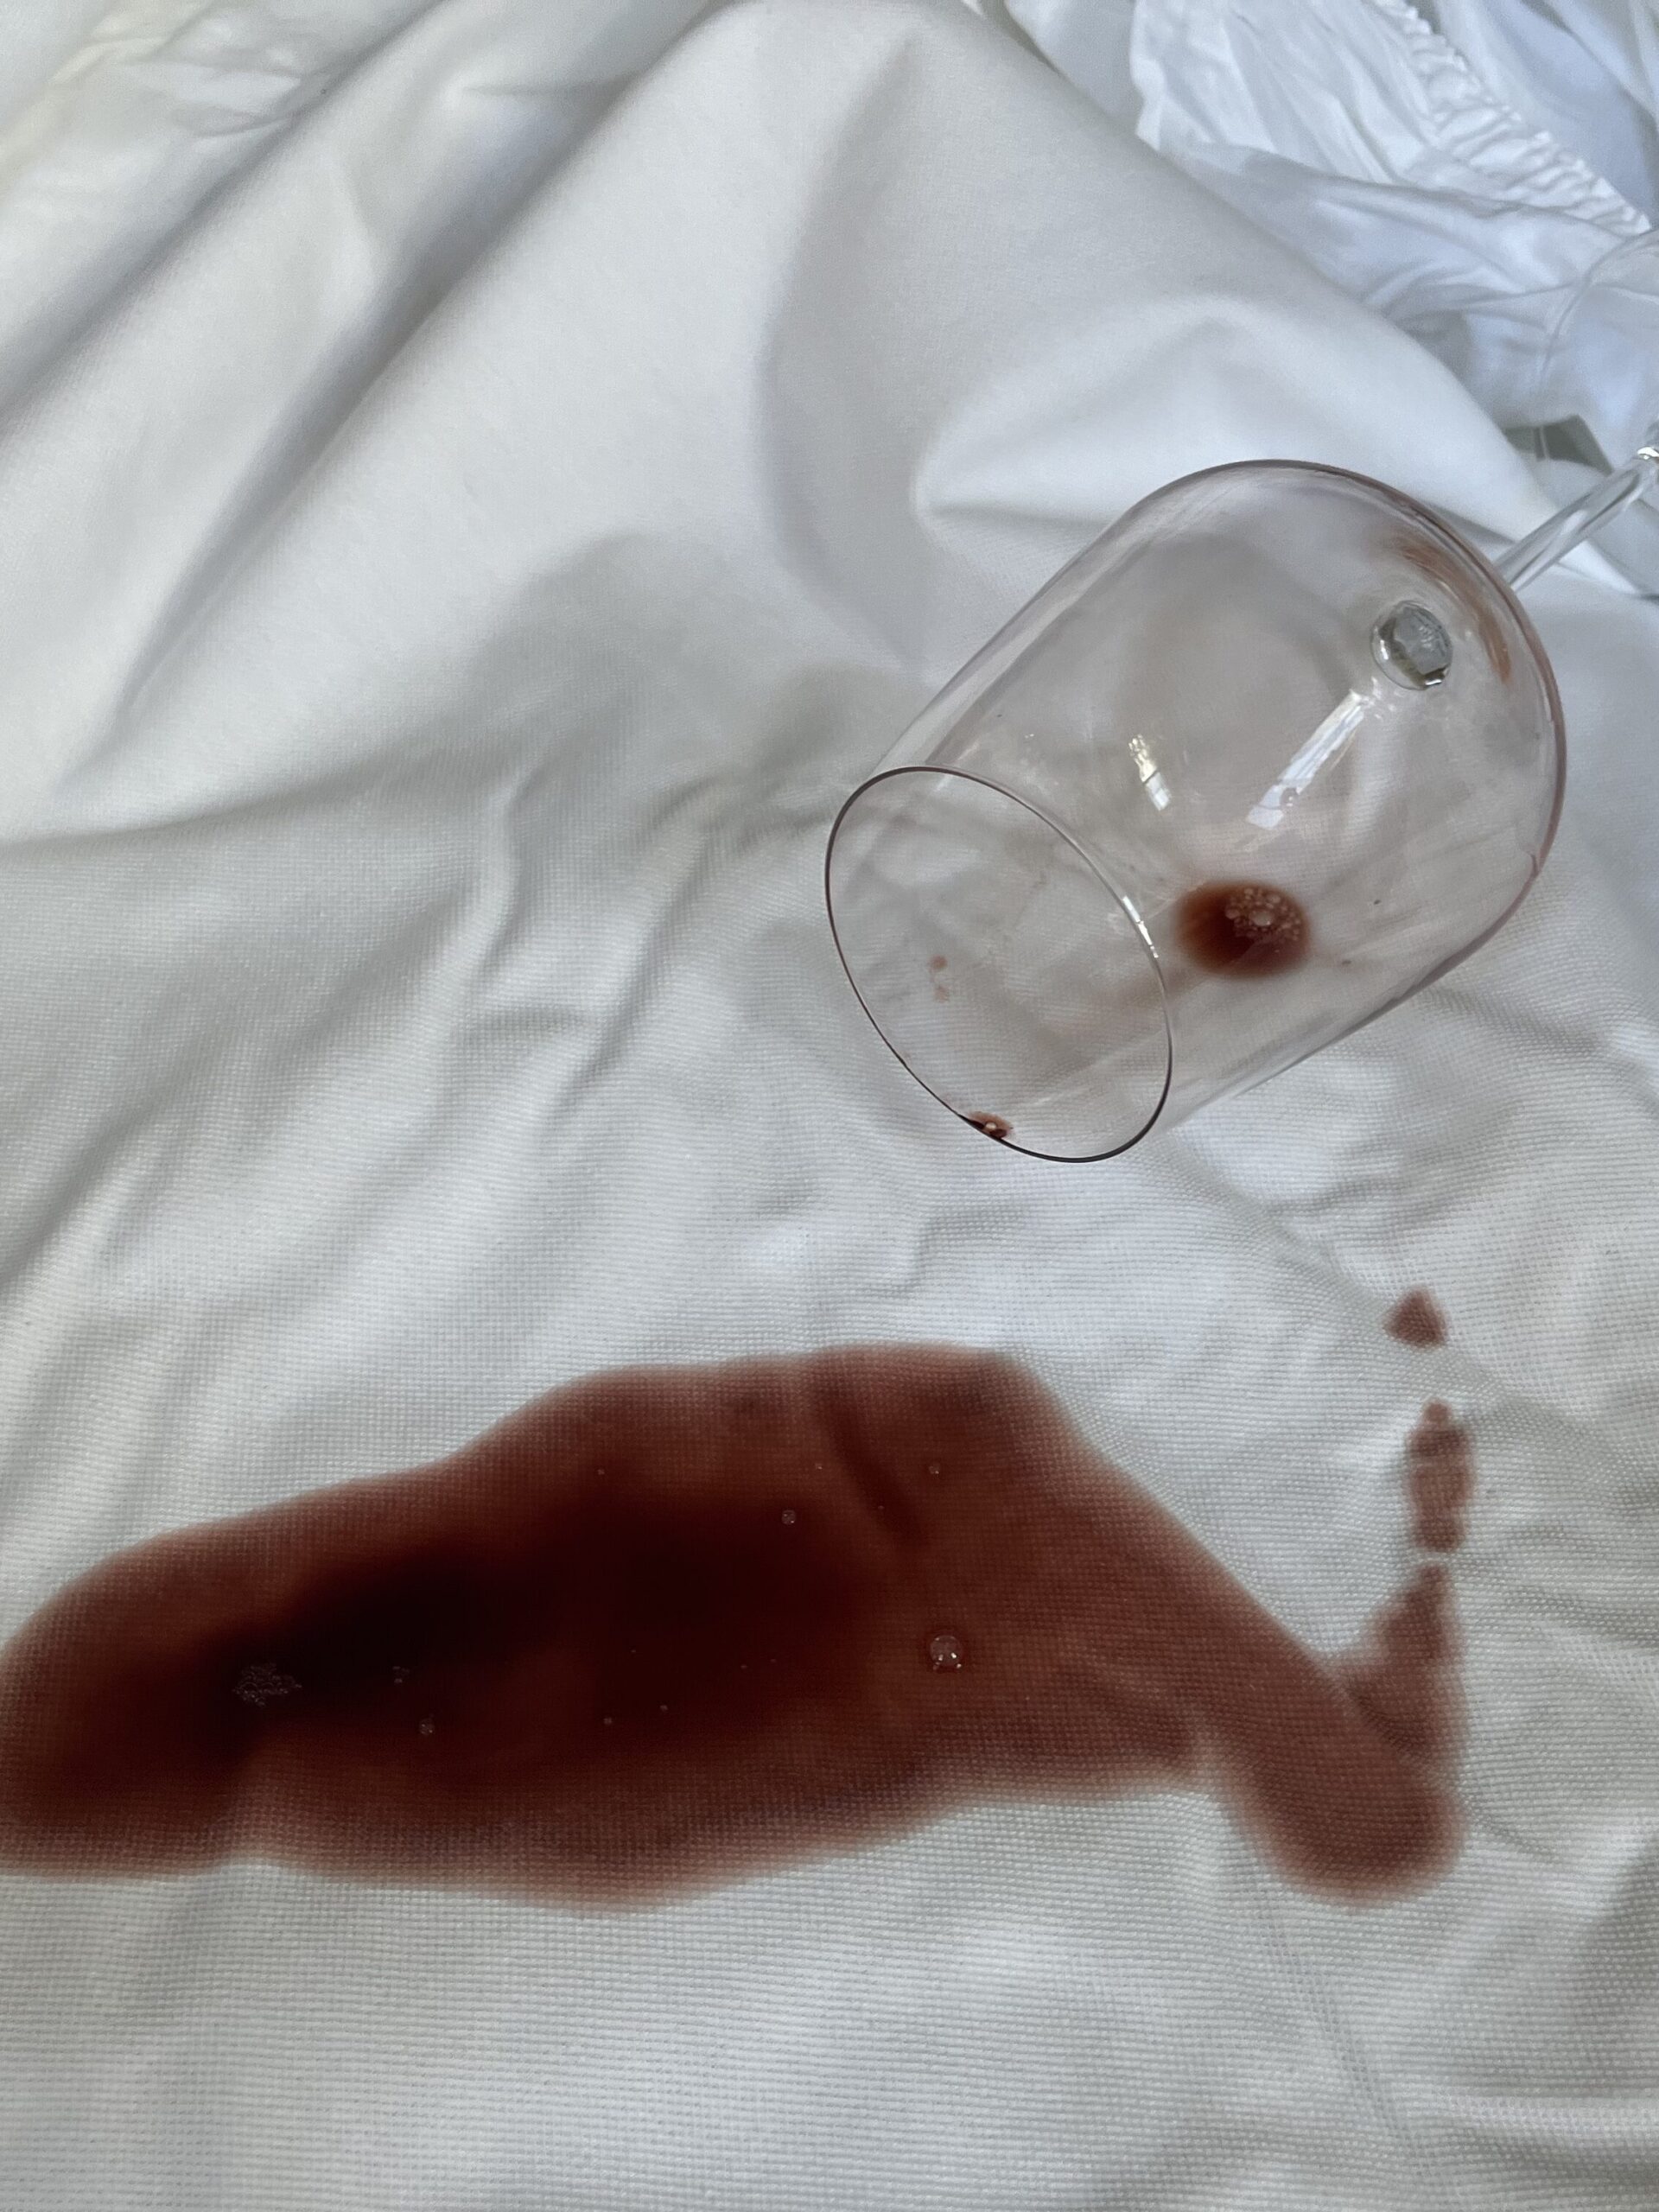 A wine spill on the mattress protector from Saatva